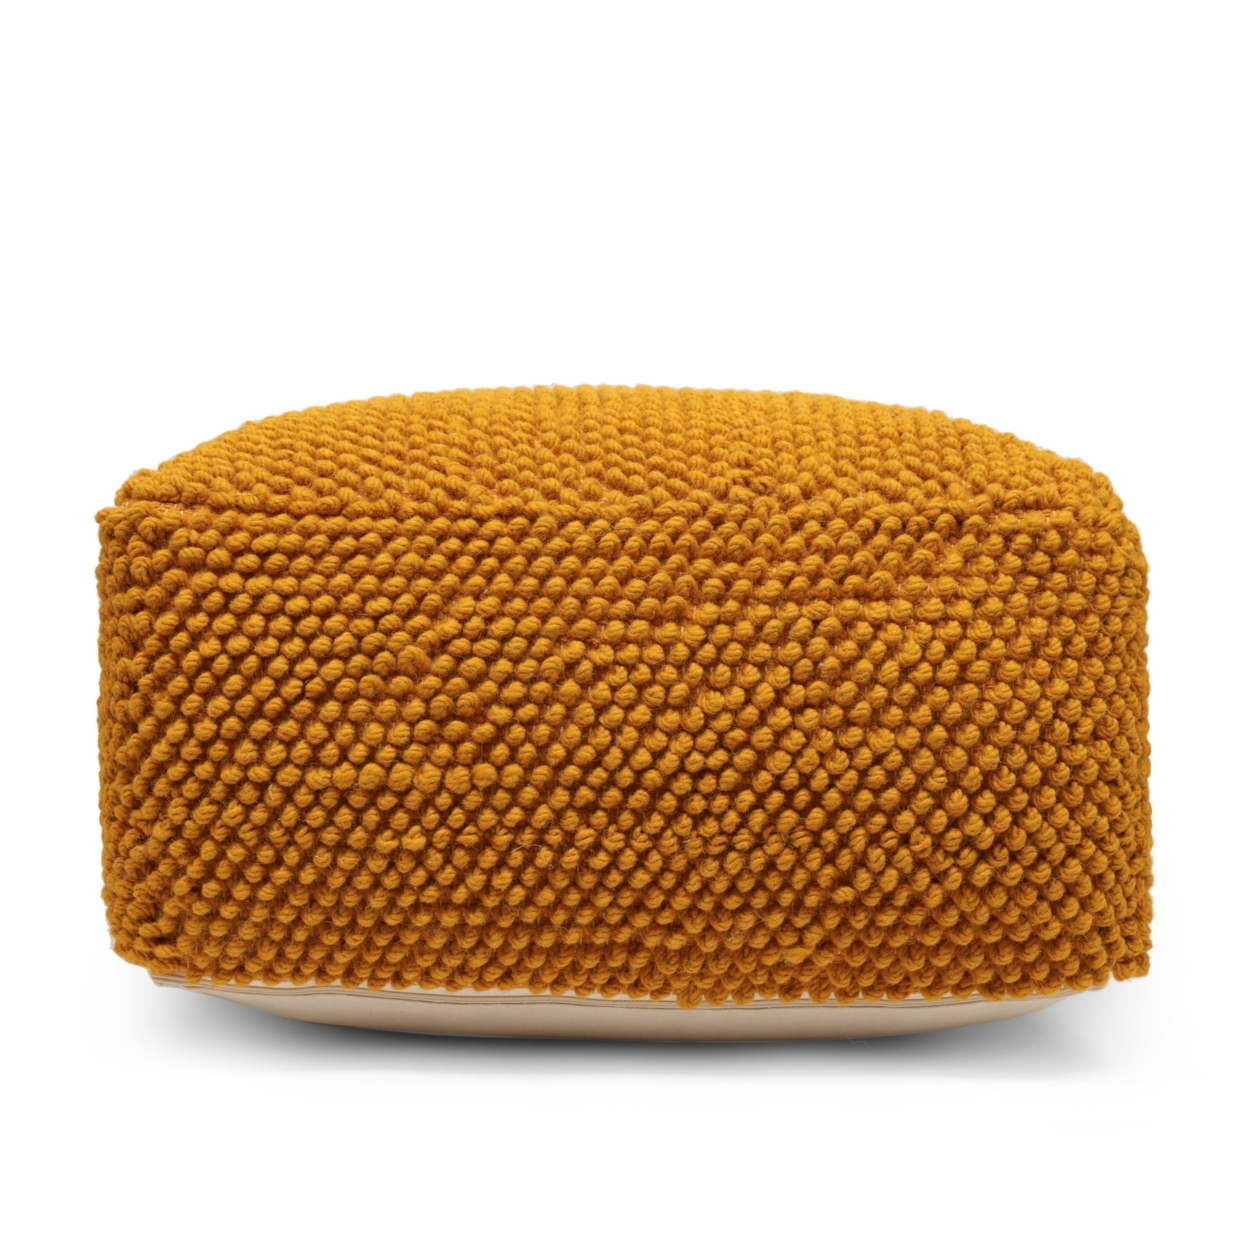 Wilsey Boho Handcrafted Tufted Fabric Square Pouf - Yellow